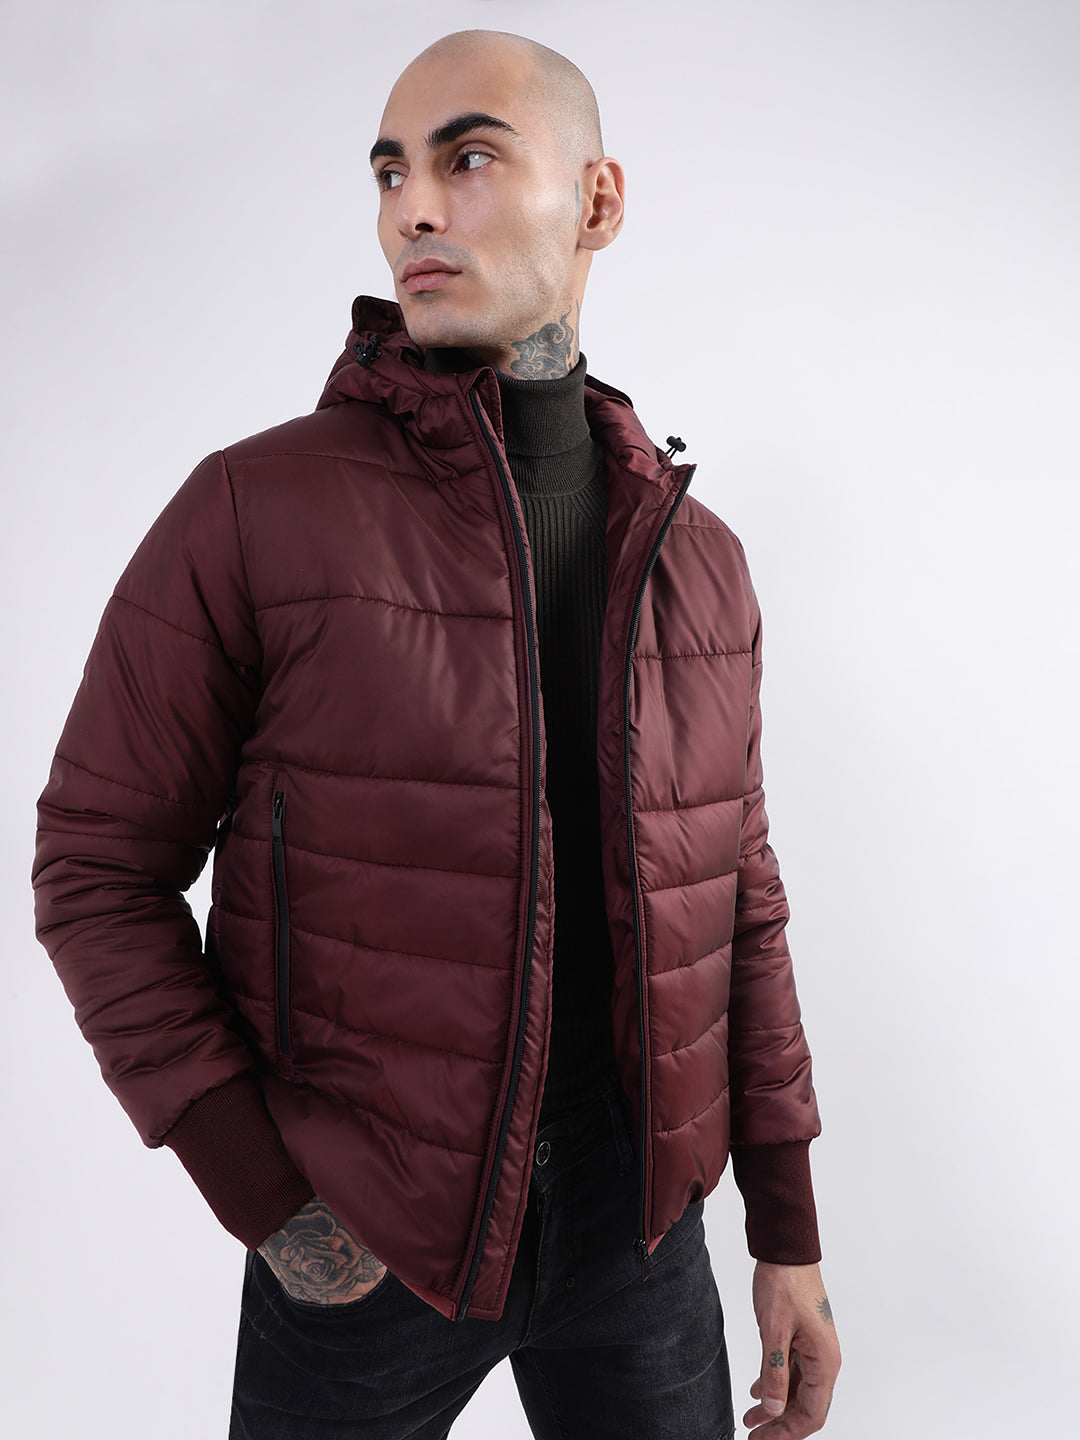 Mens Leather and Faux Leather Jackets | Amazon.com